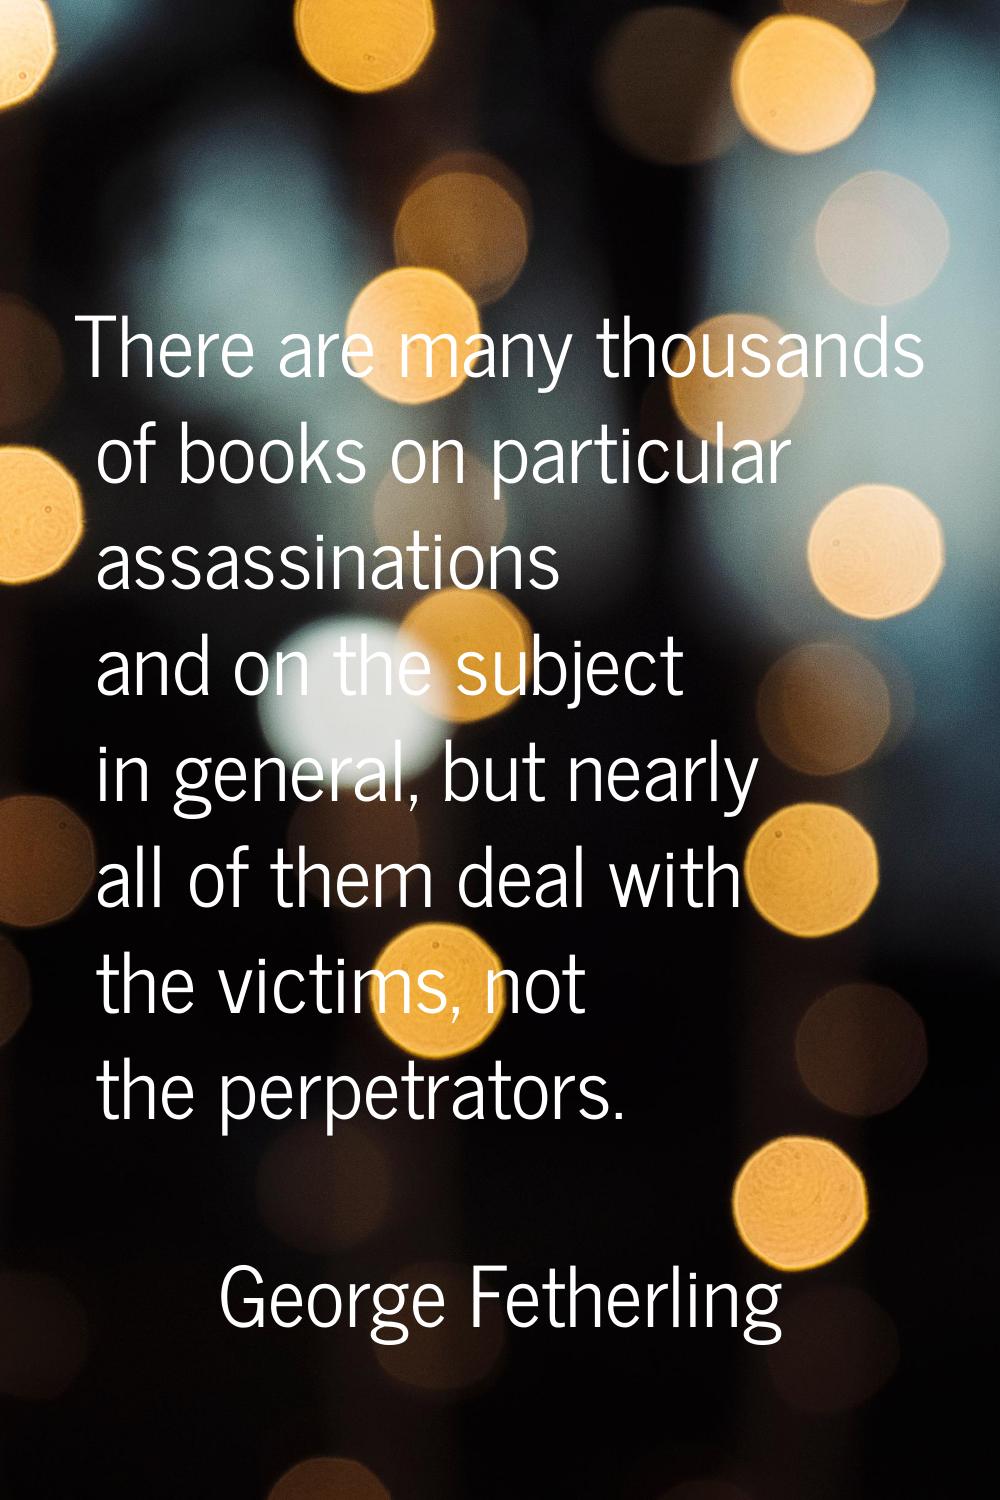 There are many thousands of books on particular assassinations and on the subject in general, but n